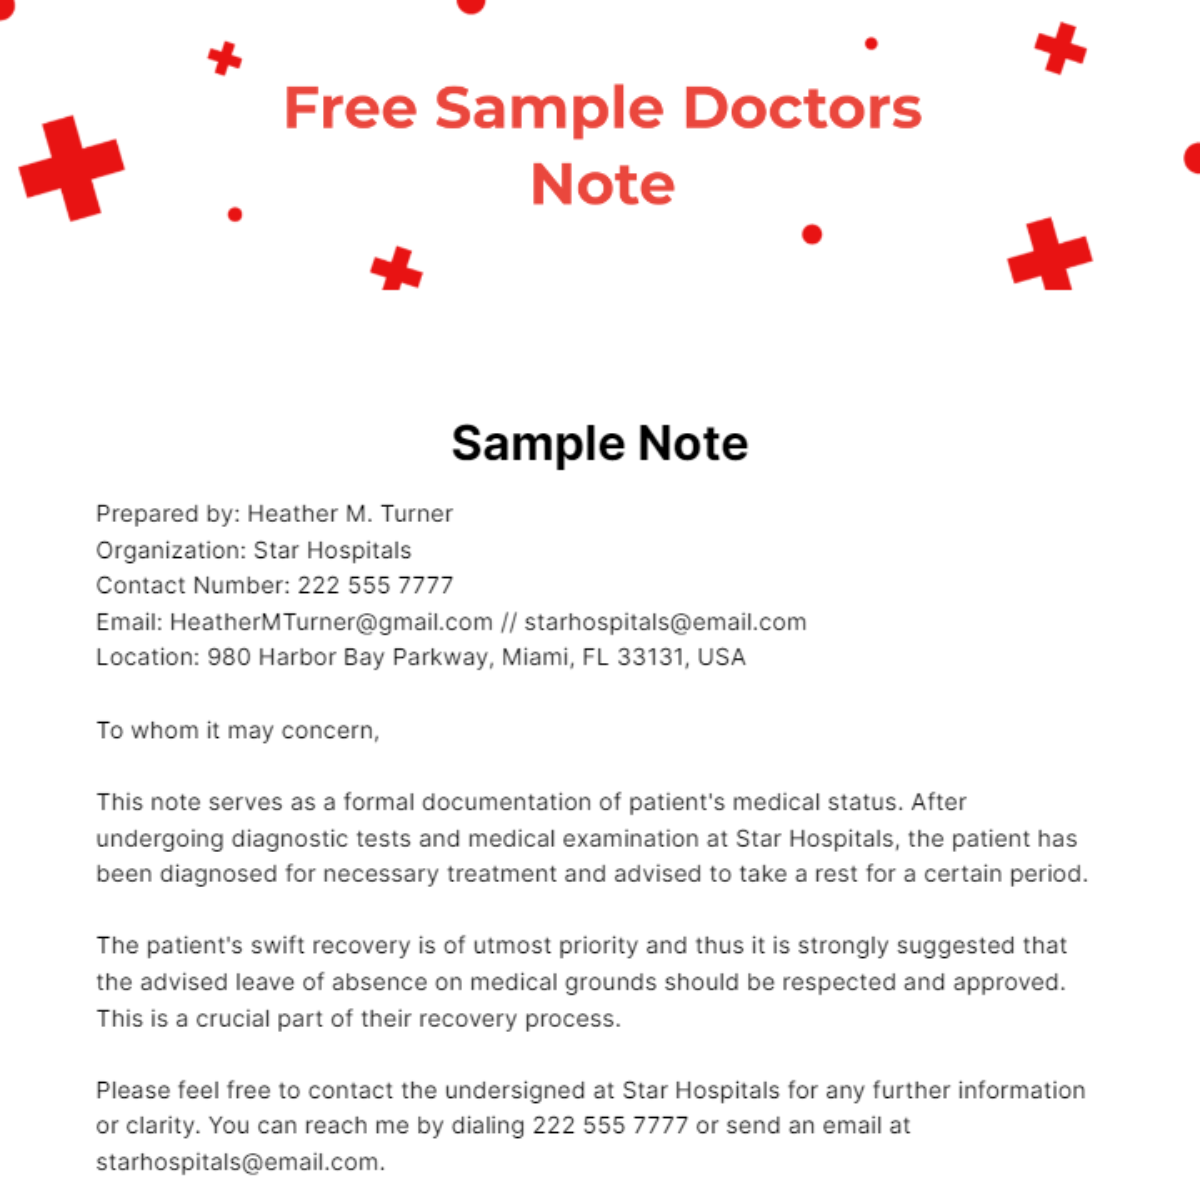 Free Sample Doctors Note Template